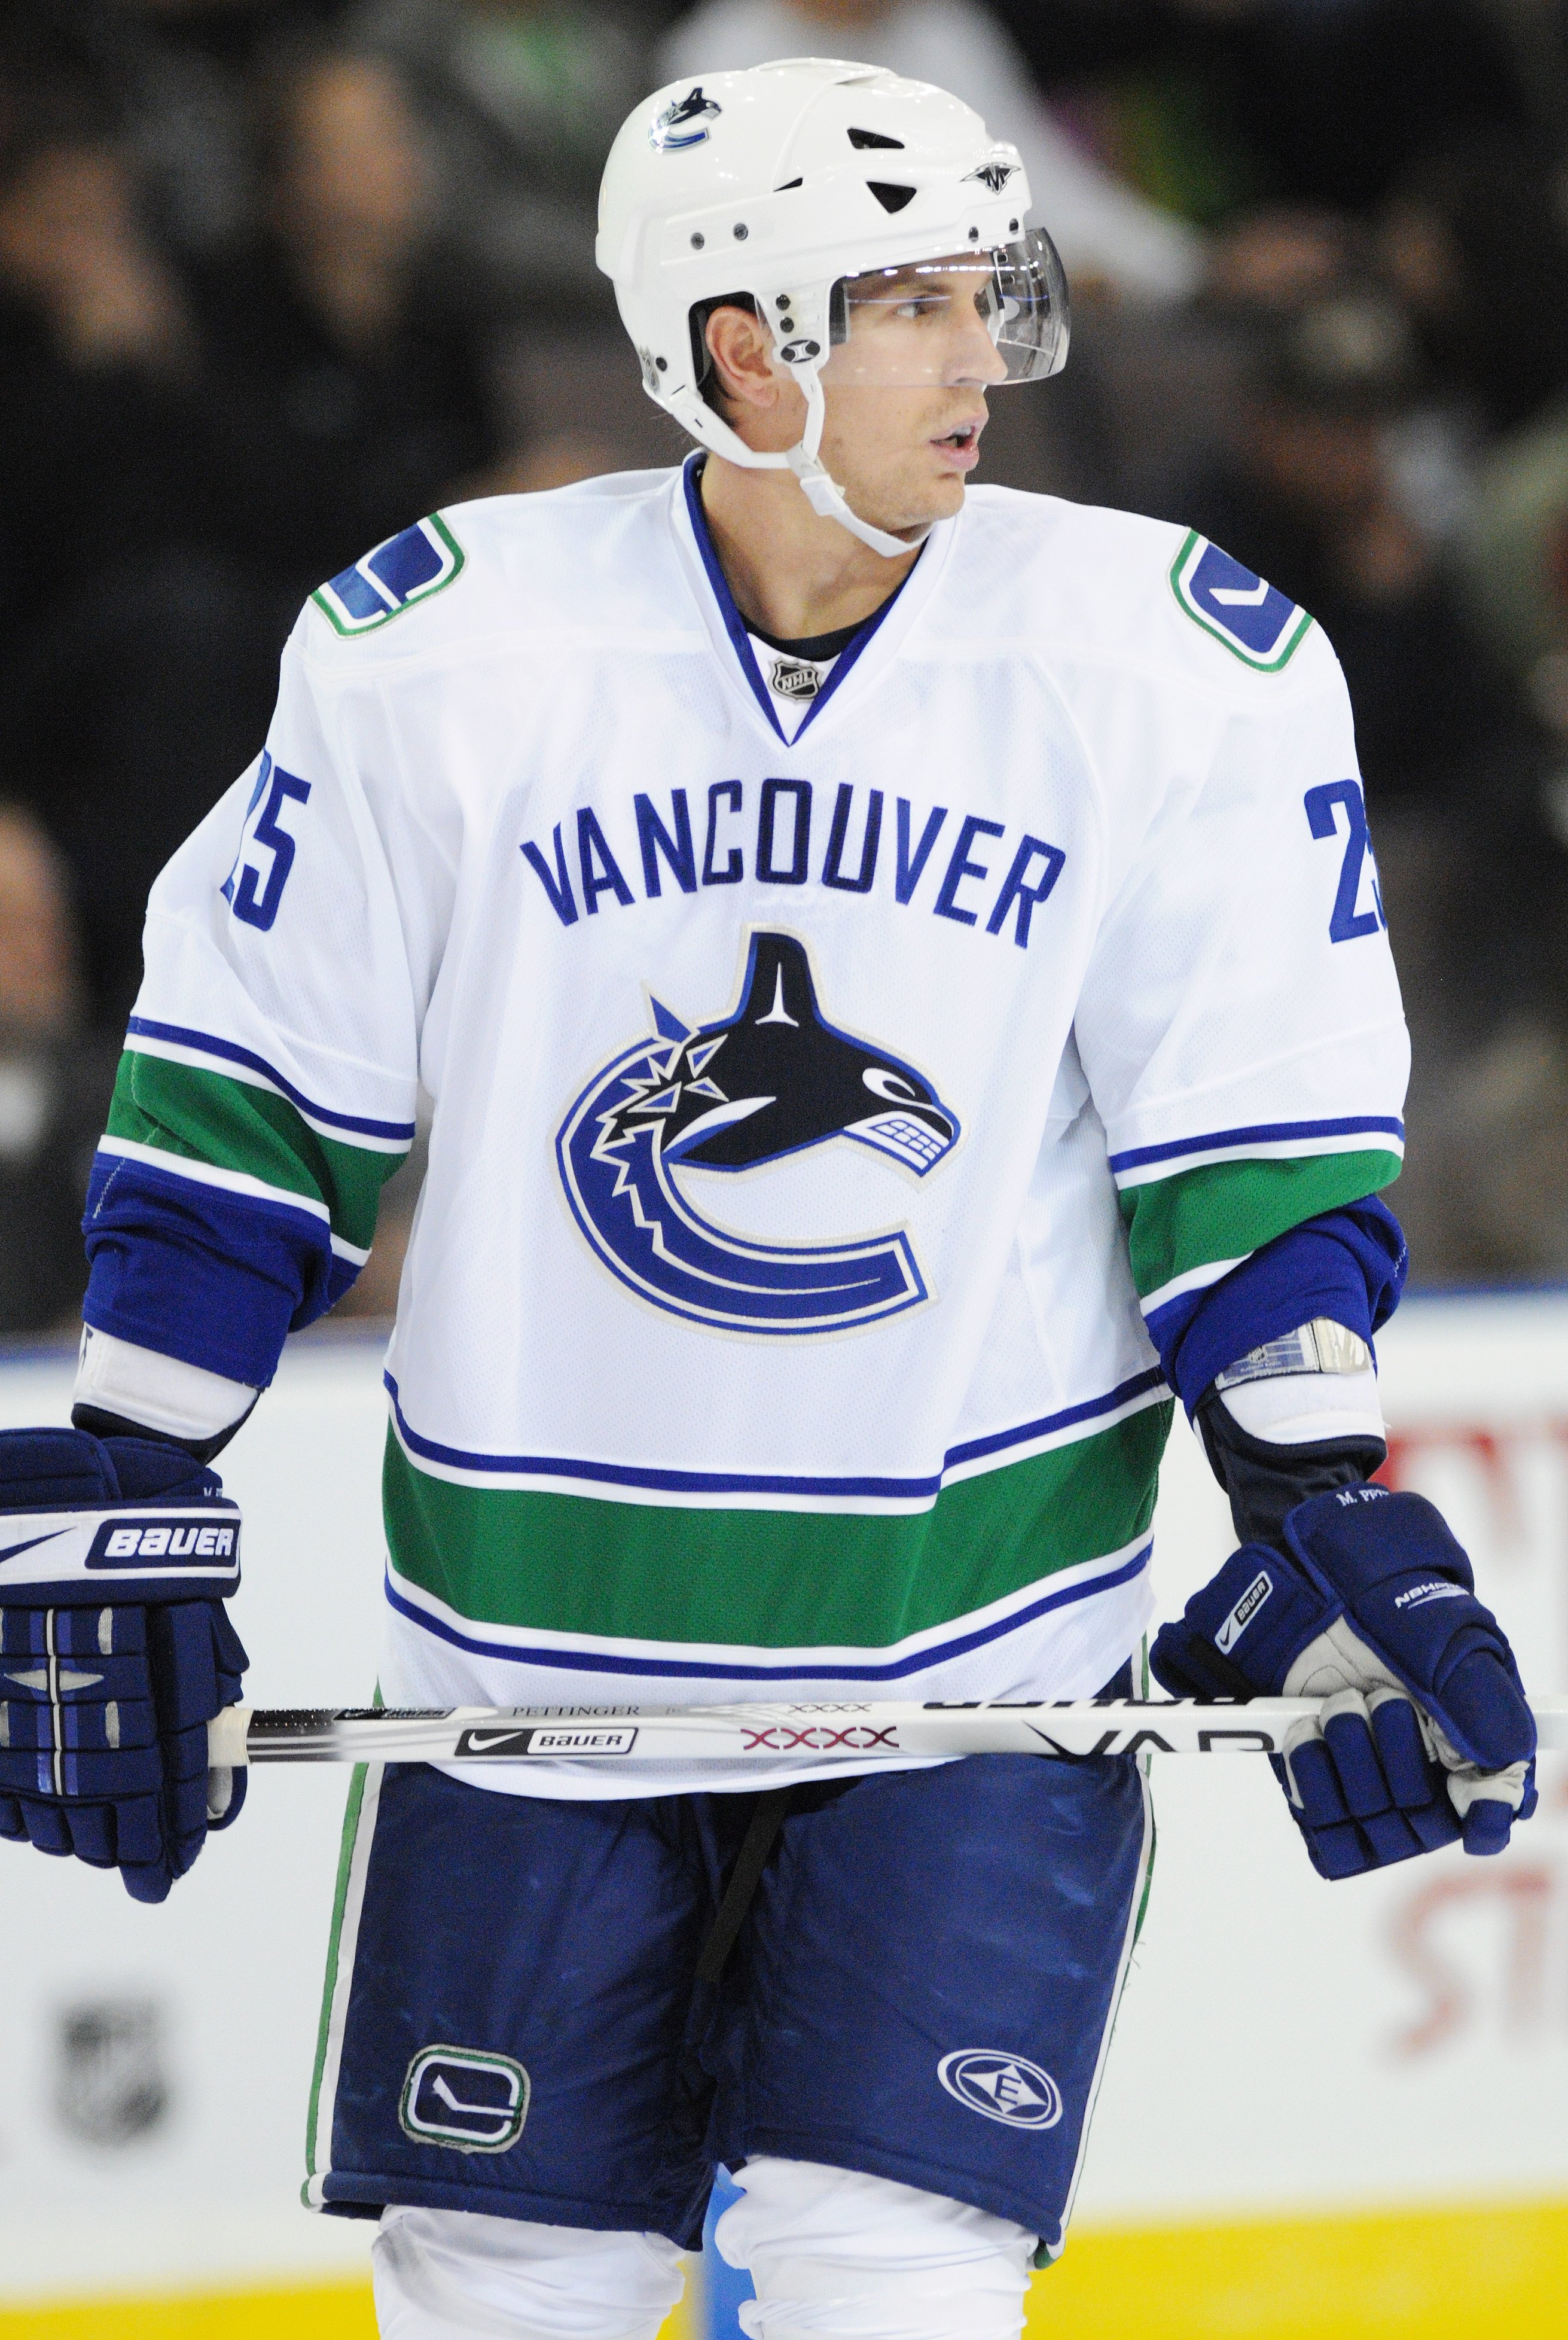 Vancouver Canucks Concept Jersey #3 : r/canucks